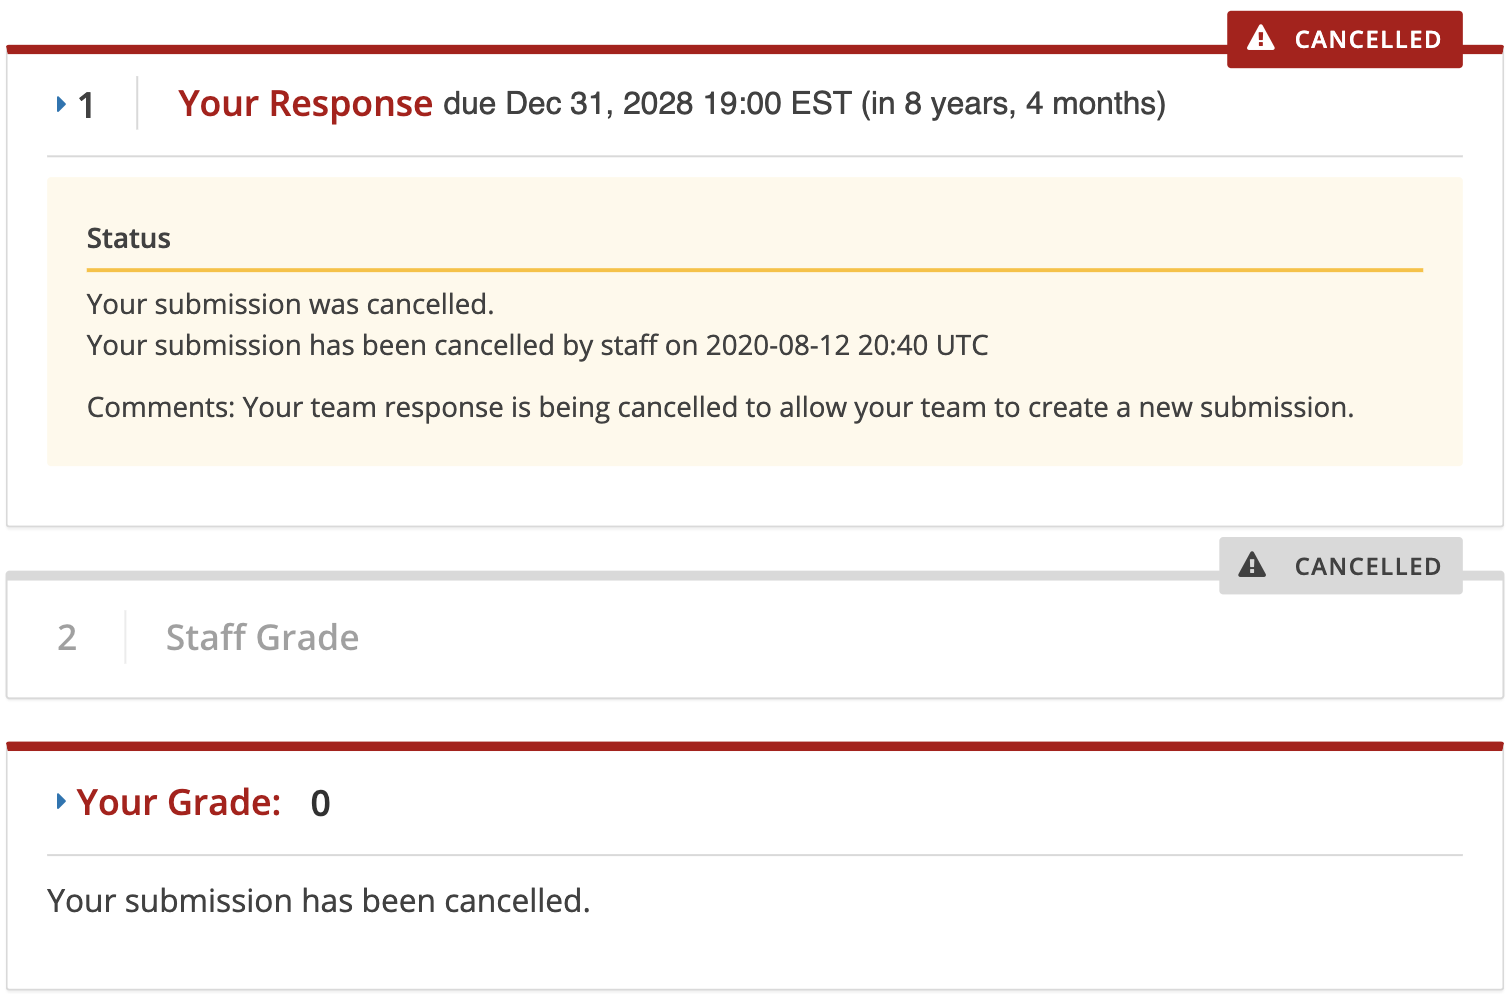 In all team members' view of the assignment, all steps have a status of Cancelled, and the learners see the date, time and comment given for the removal of their submission.